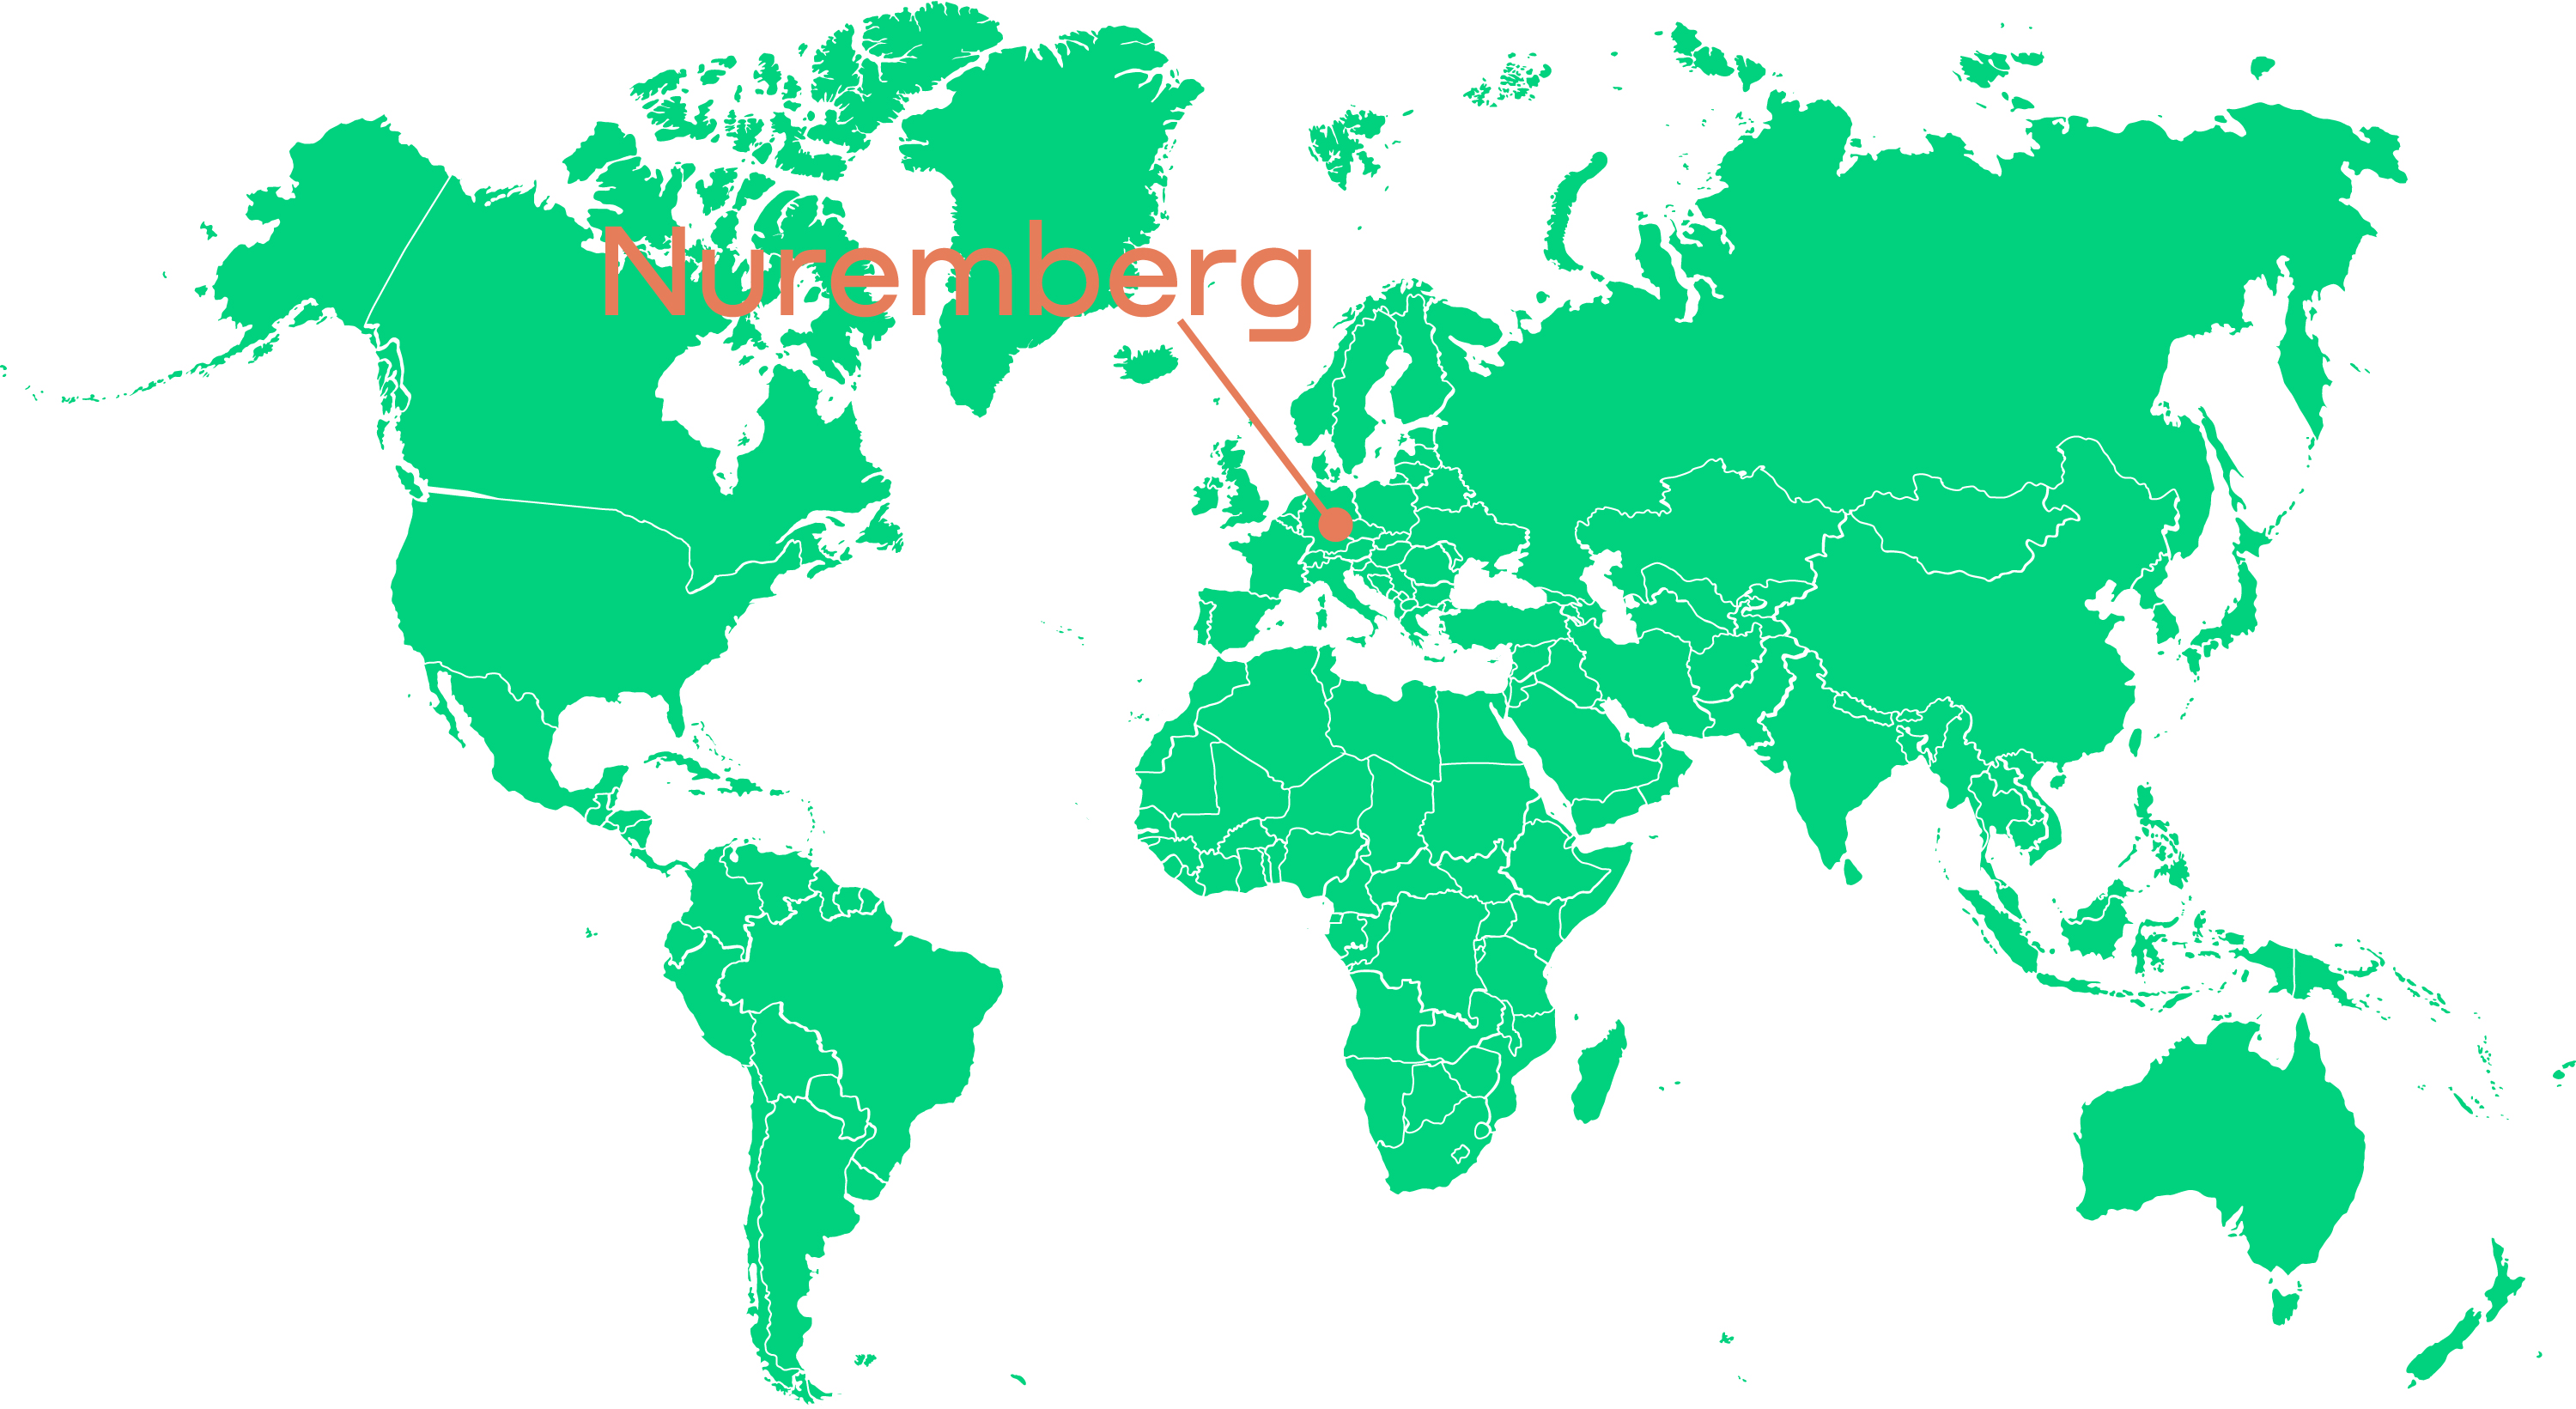 This image shows a green world map with marker on Nürnberg